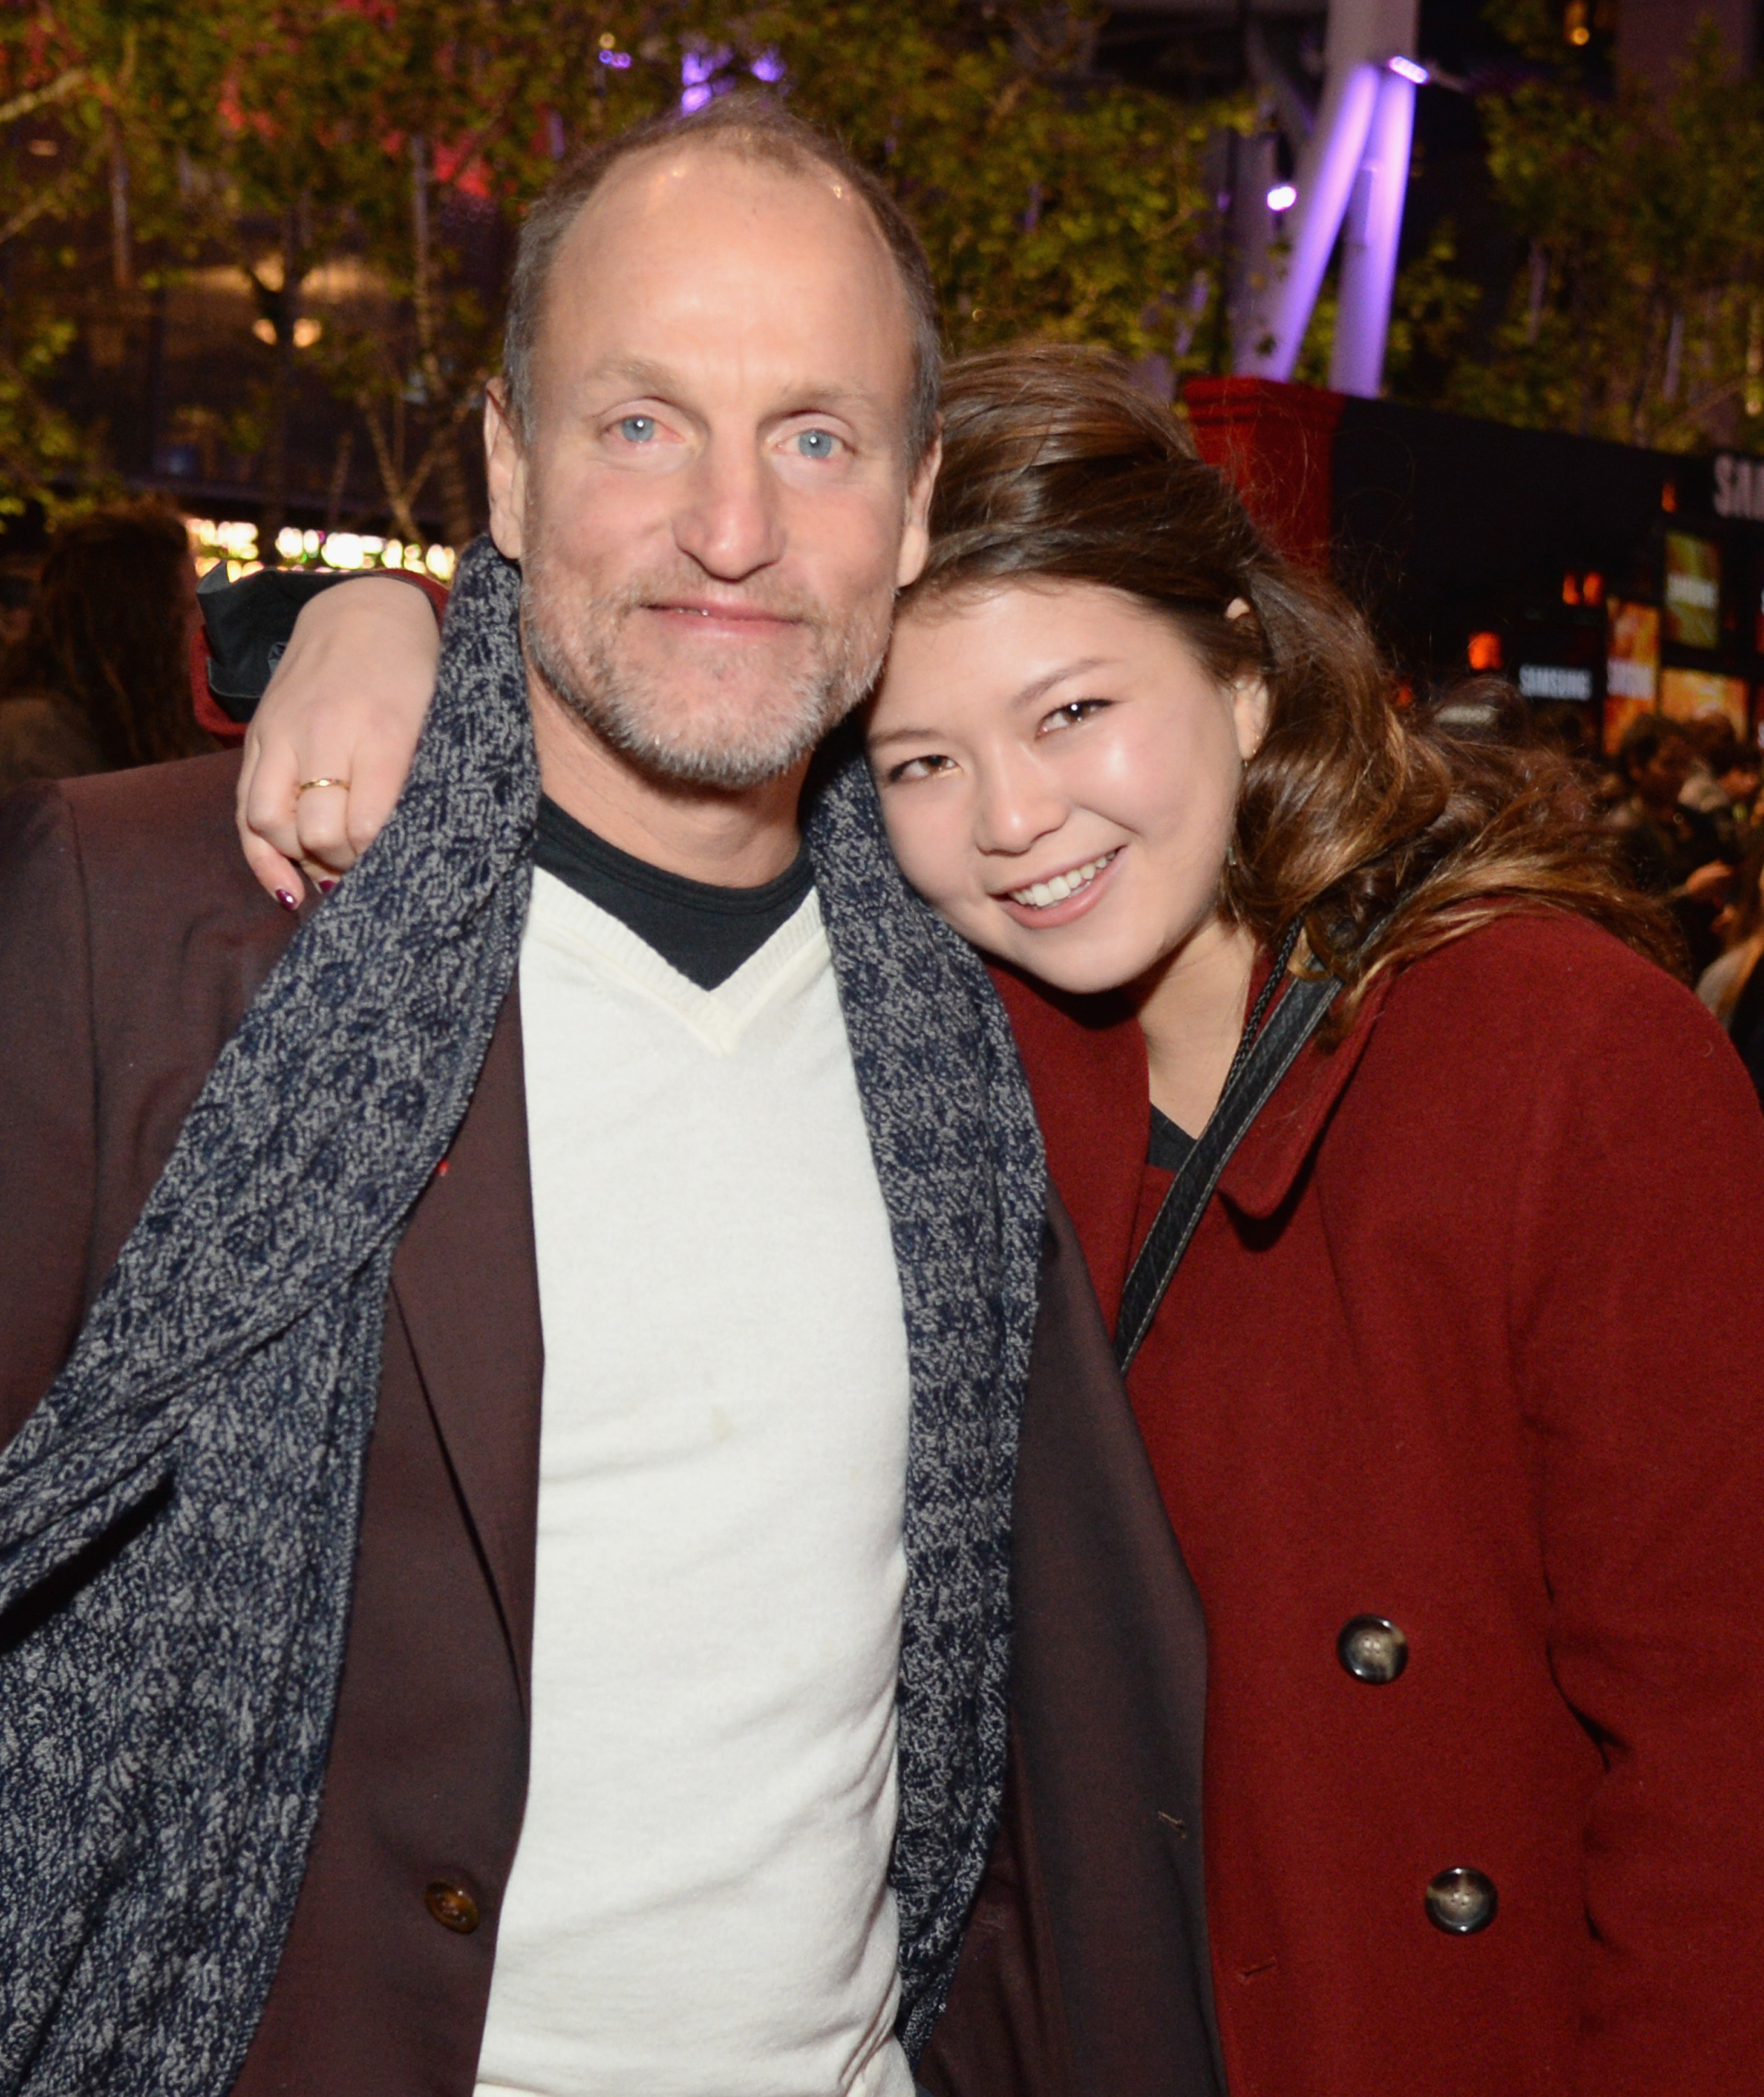 Woody Harrelson and his daughter Zoe Harrelson at the "Hunger Games: Mockingjay Part 2" Los Angeles premiere on November 16, 2015, in California | Source: Getty Images